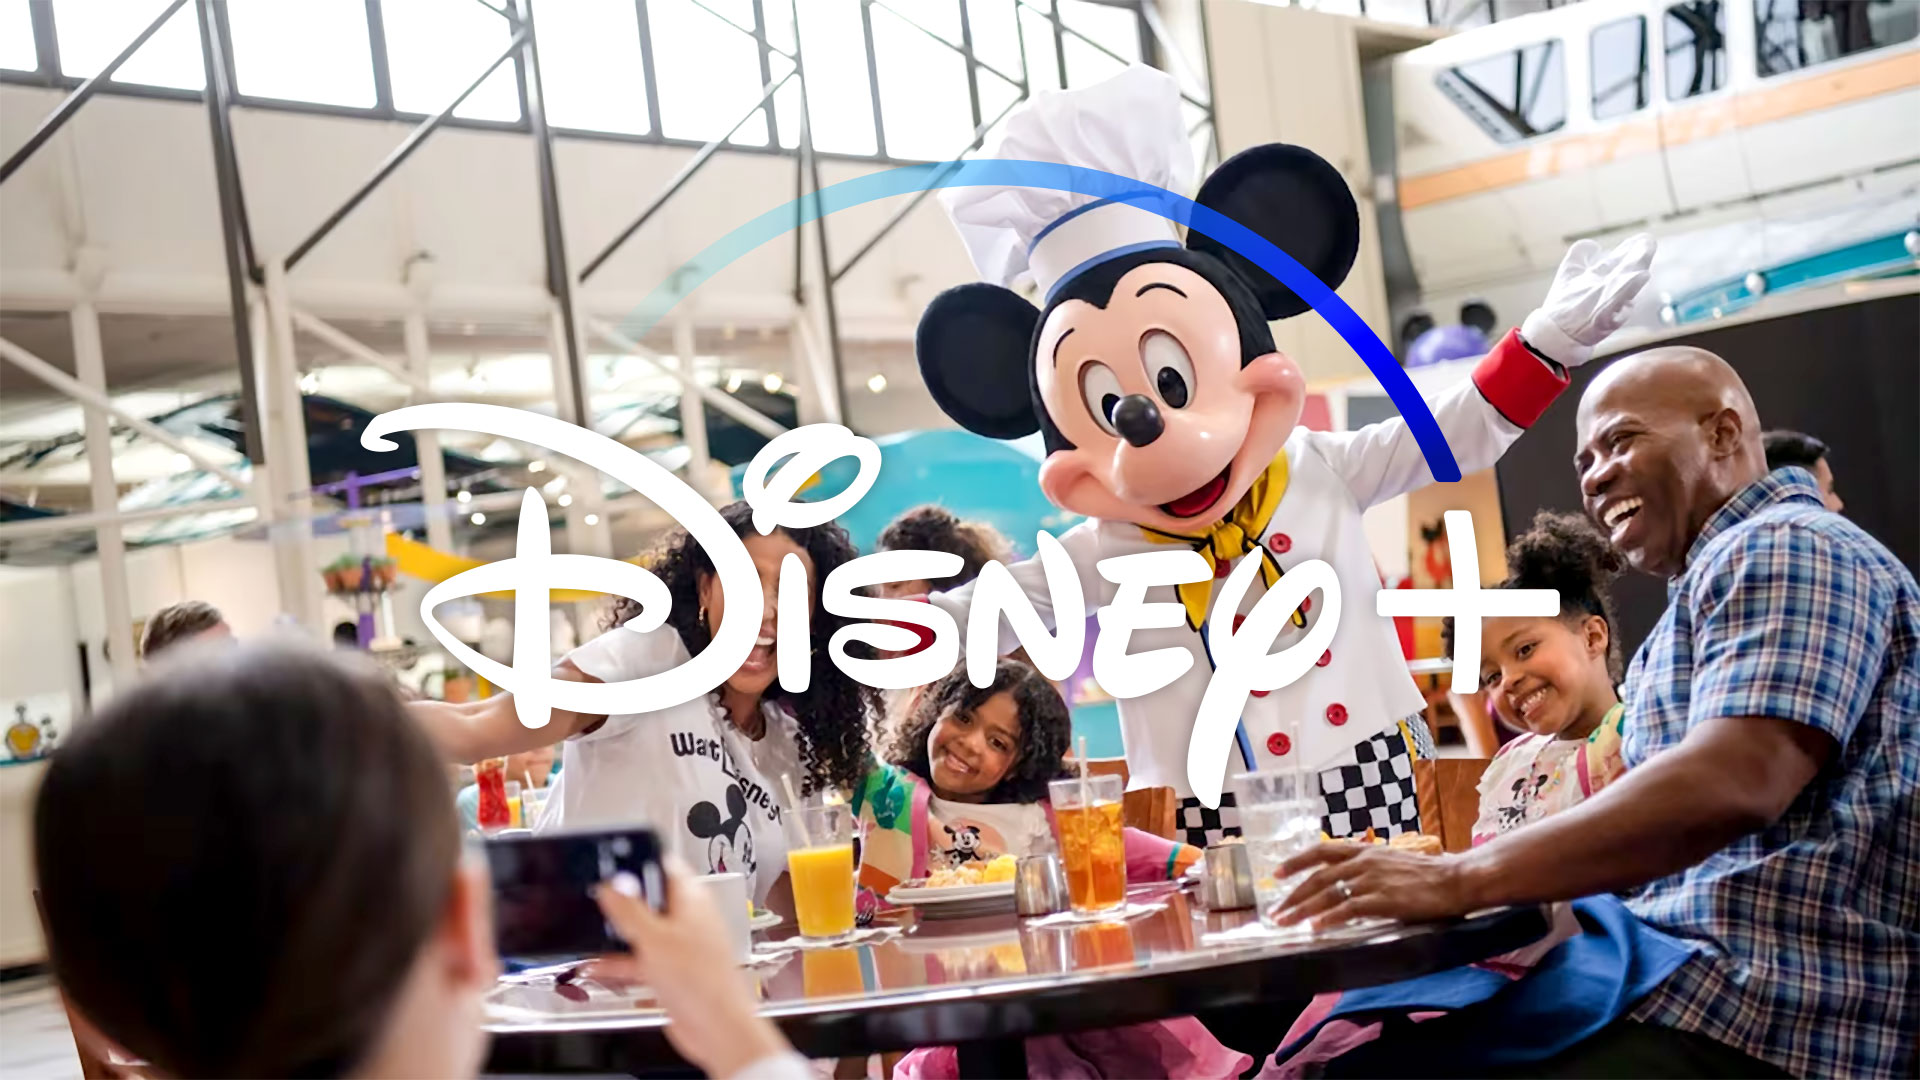 Eat for free at Walt Disney World with Disney+